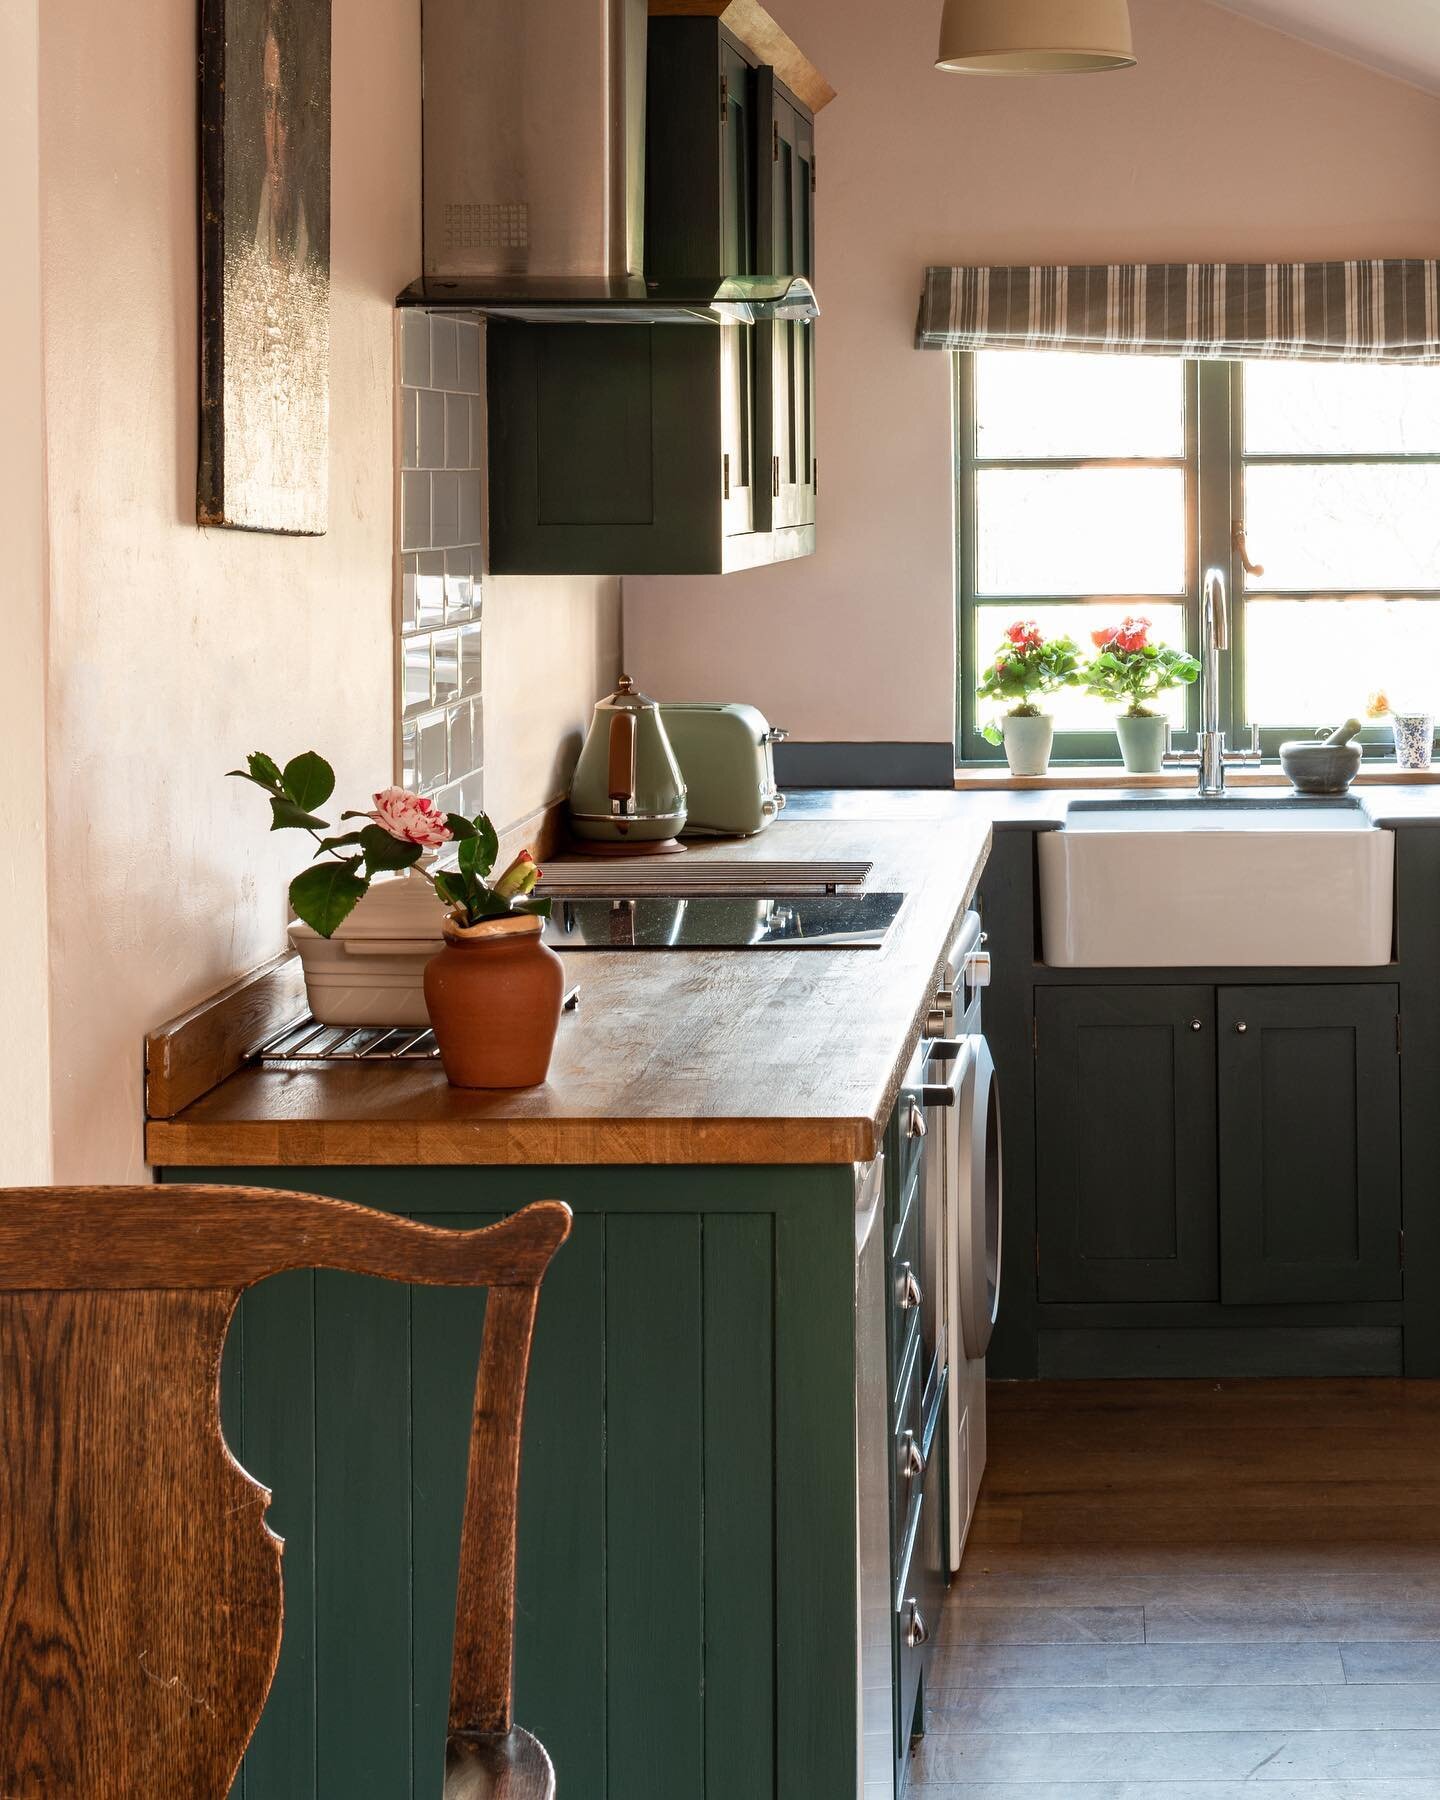 We&rsquo;re still so in love with our cosy cottages since renovating them earlier in the year. The small details, like beautiful flowers from the garden, homemade treats and freshly baked bread, bring an incredibly homely feel to both of the cottages